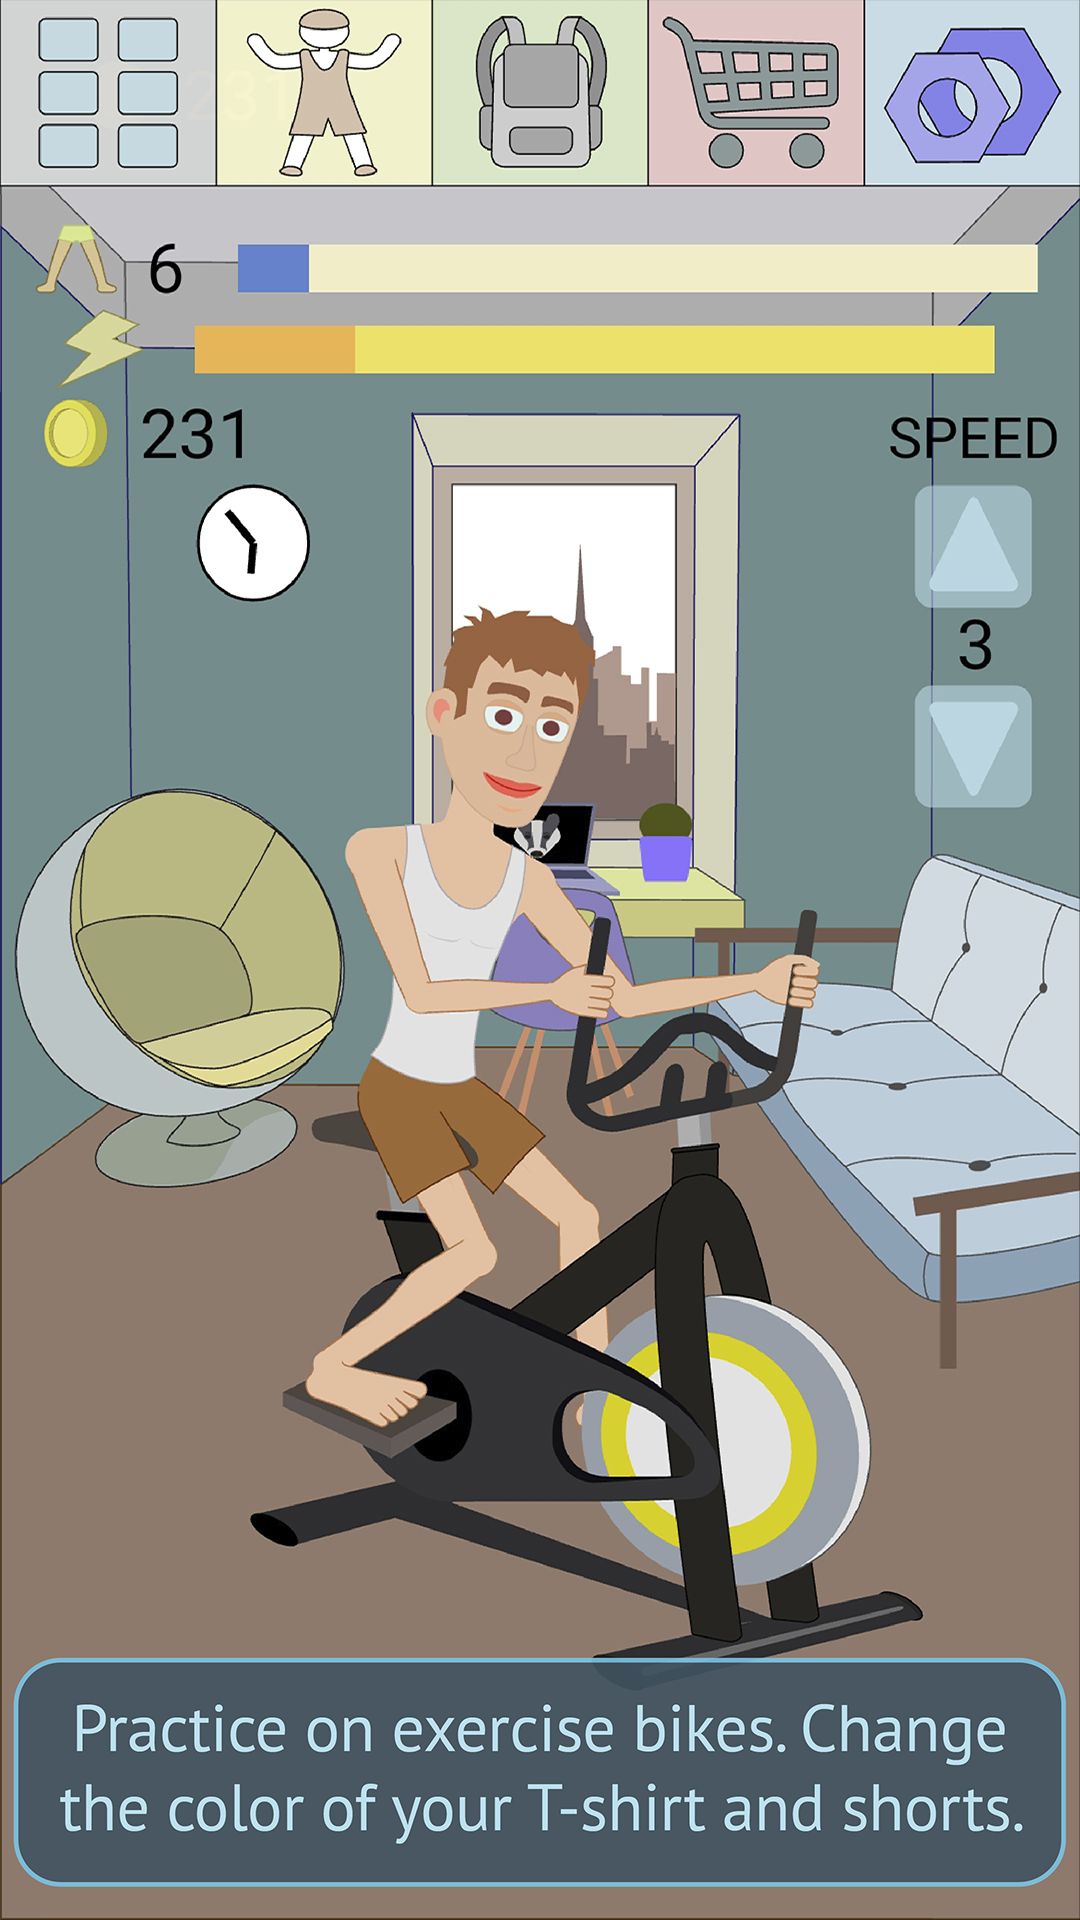 Muscle clicker 2: RPG Gym game for Android